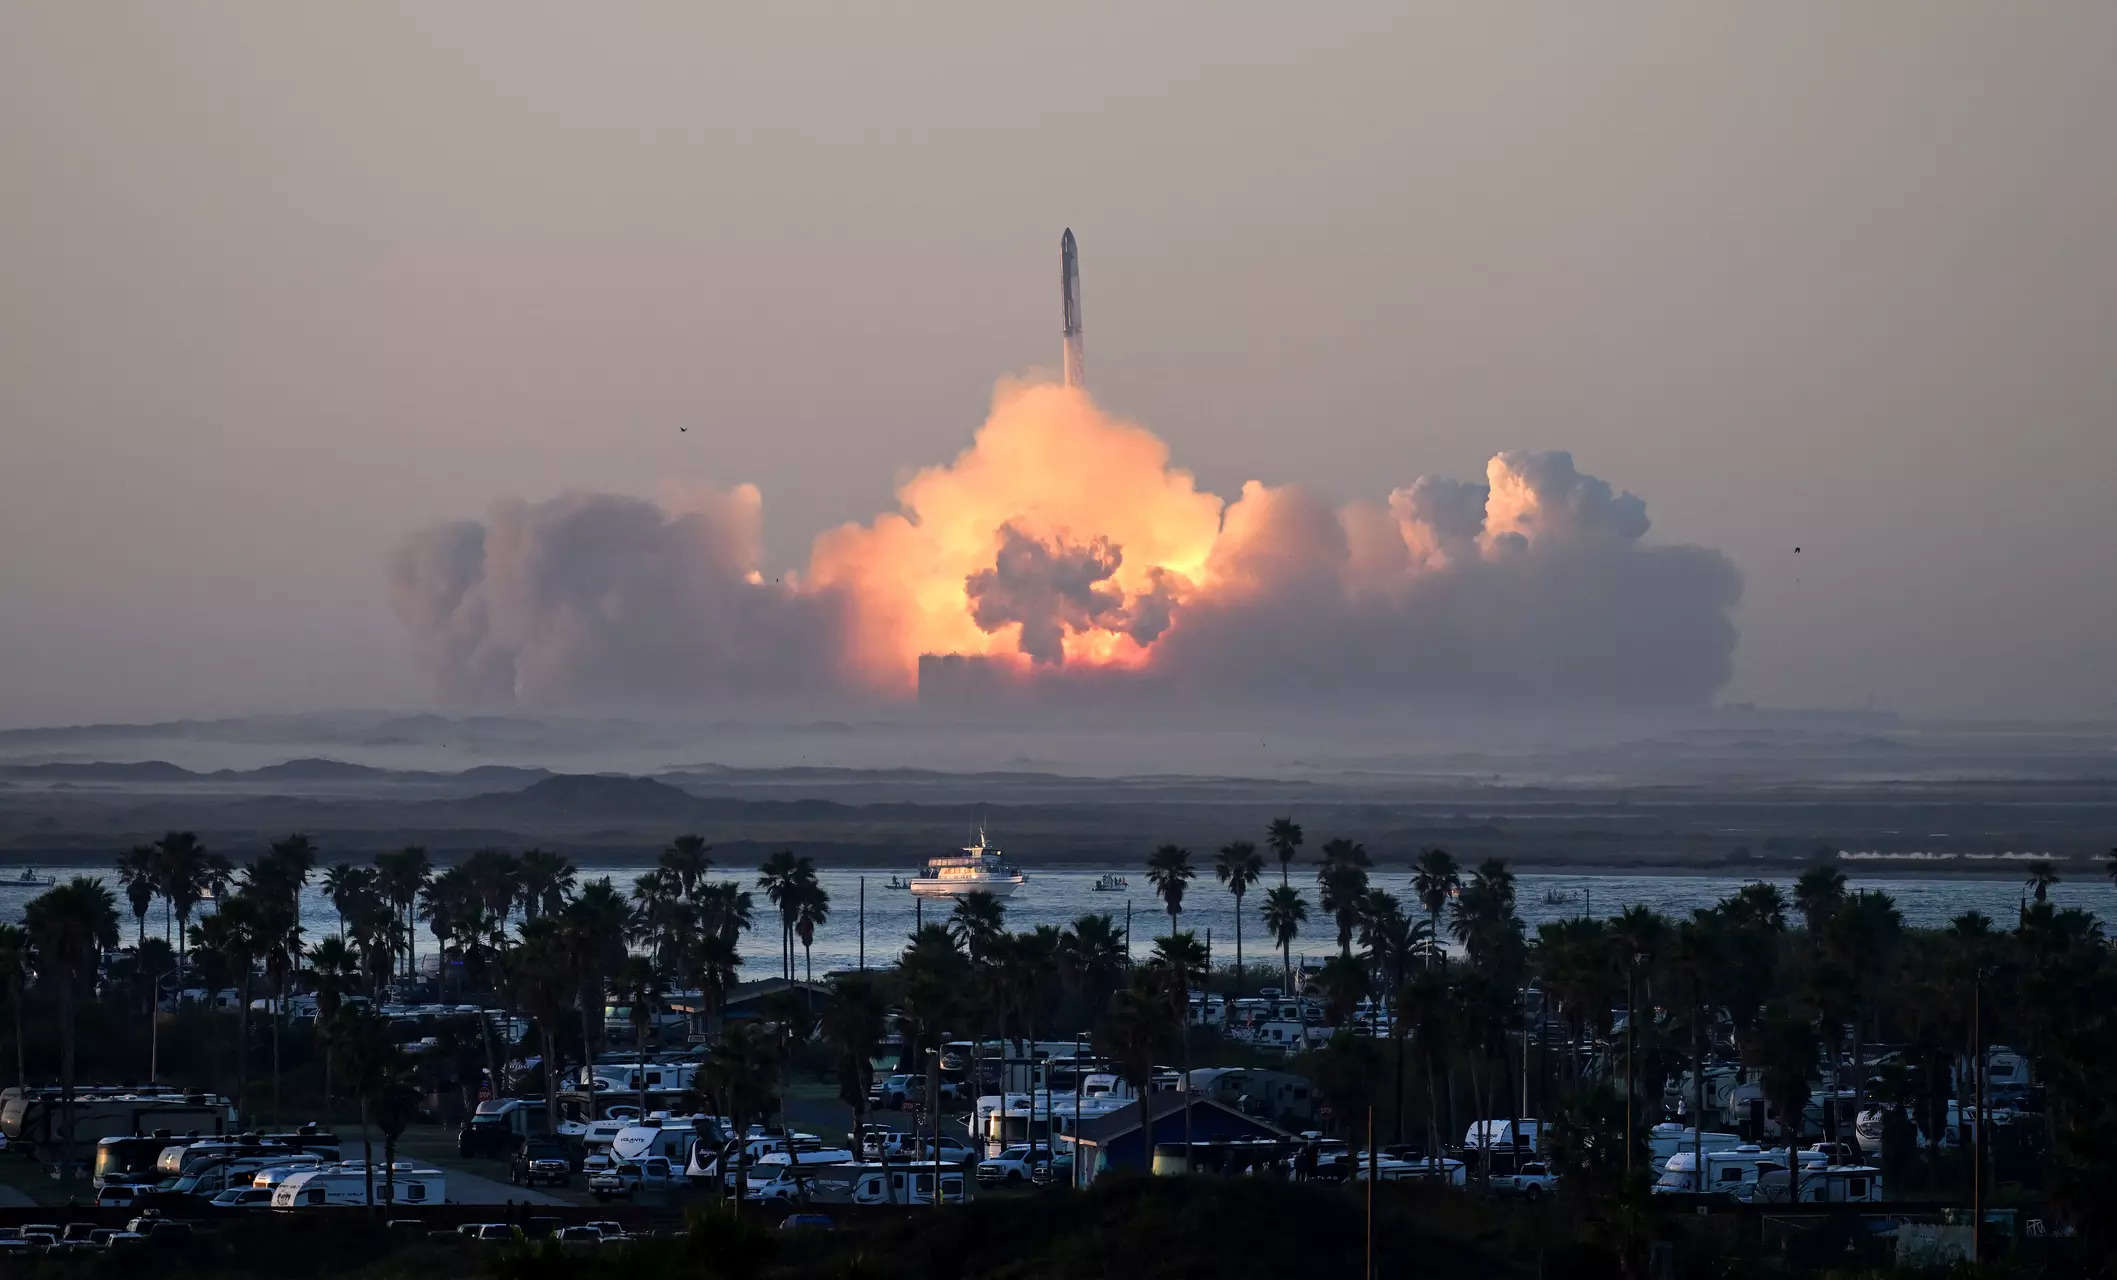 Starship Rocket by SpaceX Reaches Space: Here Is Why the Rocket was Intentionally Destroyed Mid-Flight 